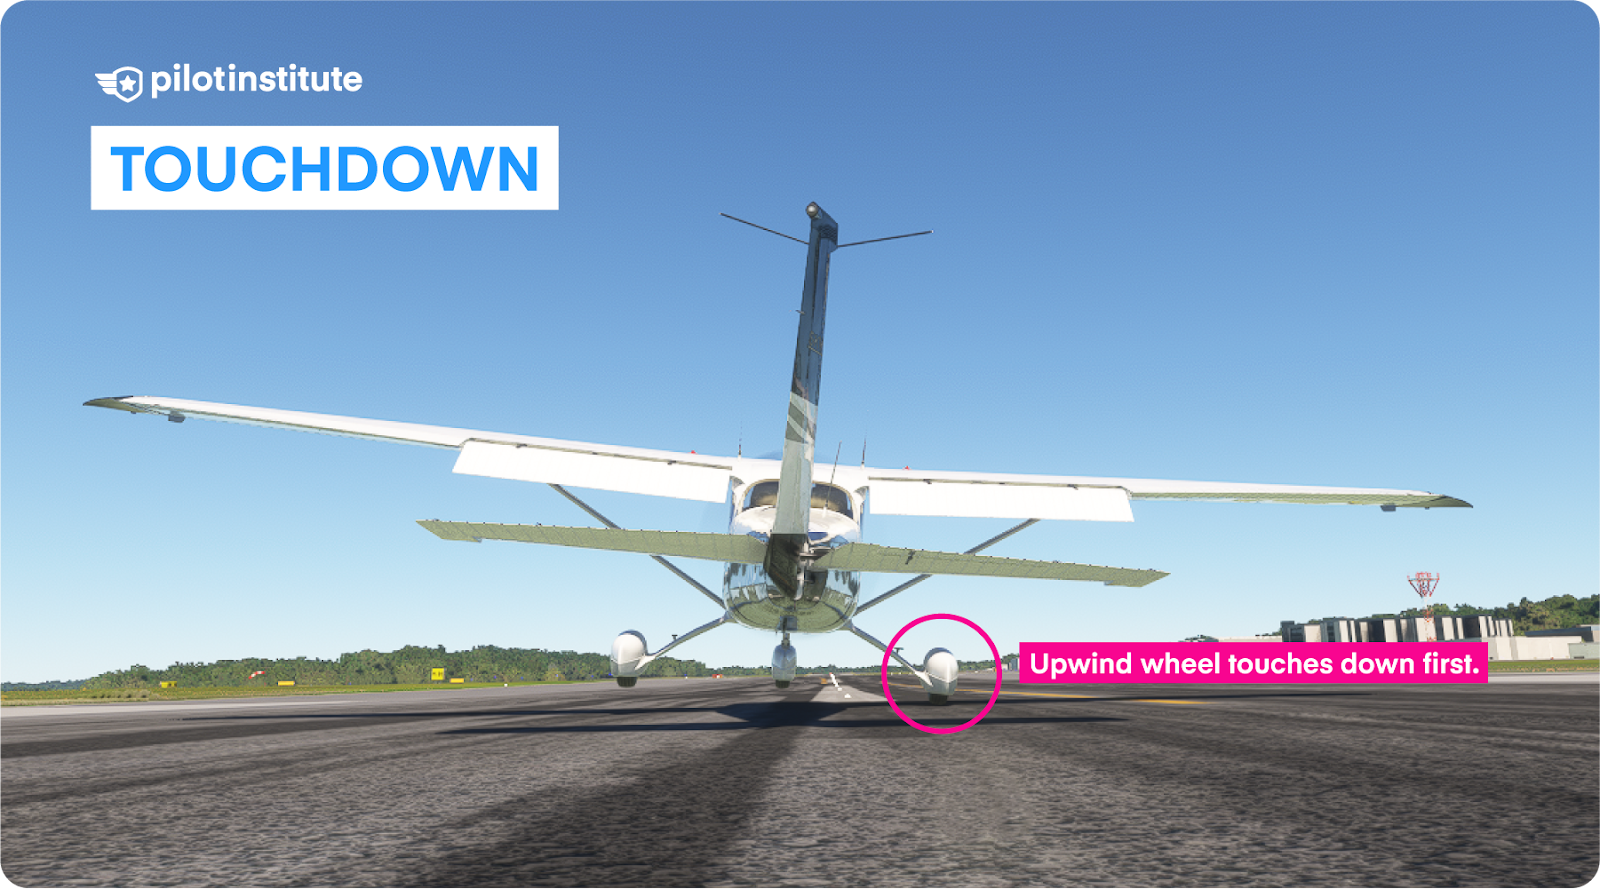 Aircraft touching down on upwind wheel.